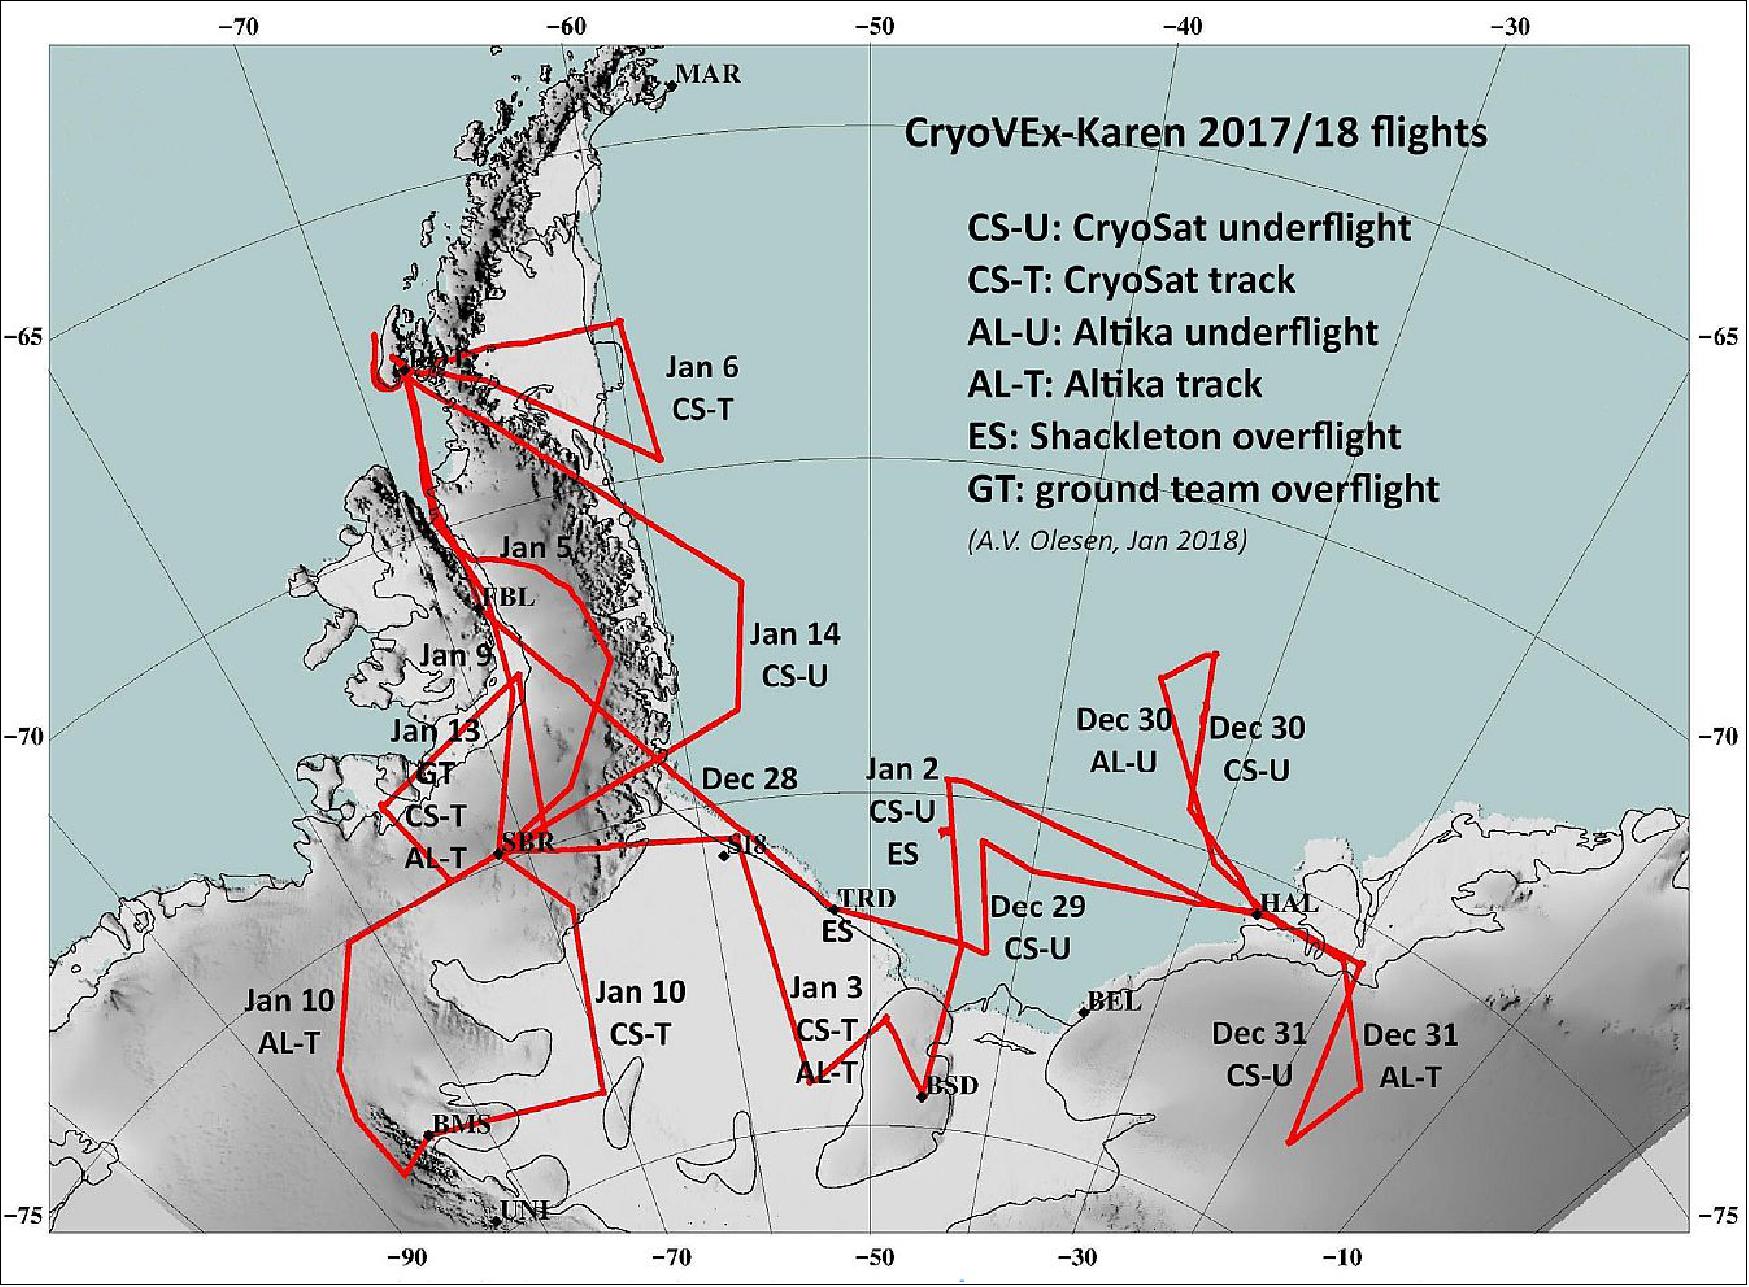 Figure 35: Overview of the flight tracks from the CryoVEx/KAREN Antarctic 2017-18 airborne campaign (image credit: DTU Space, ESA)